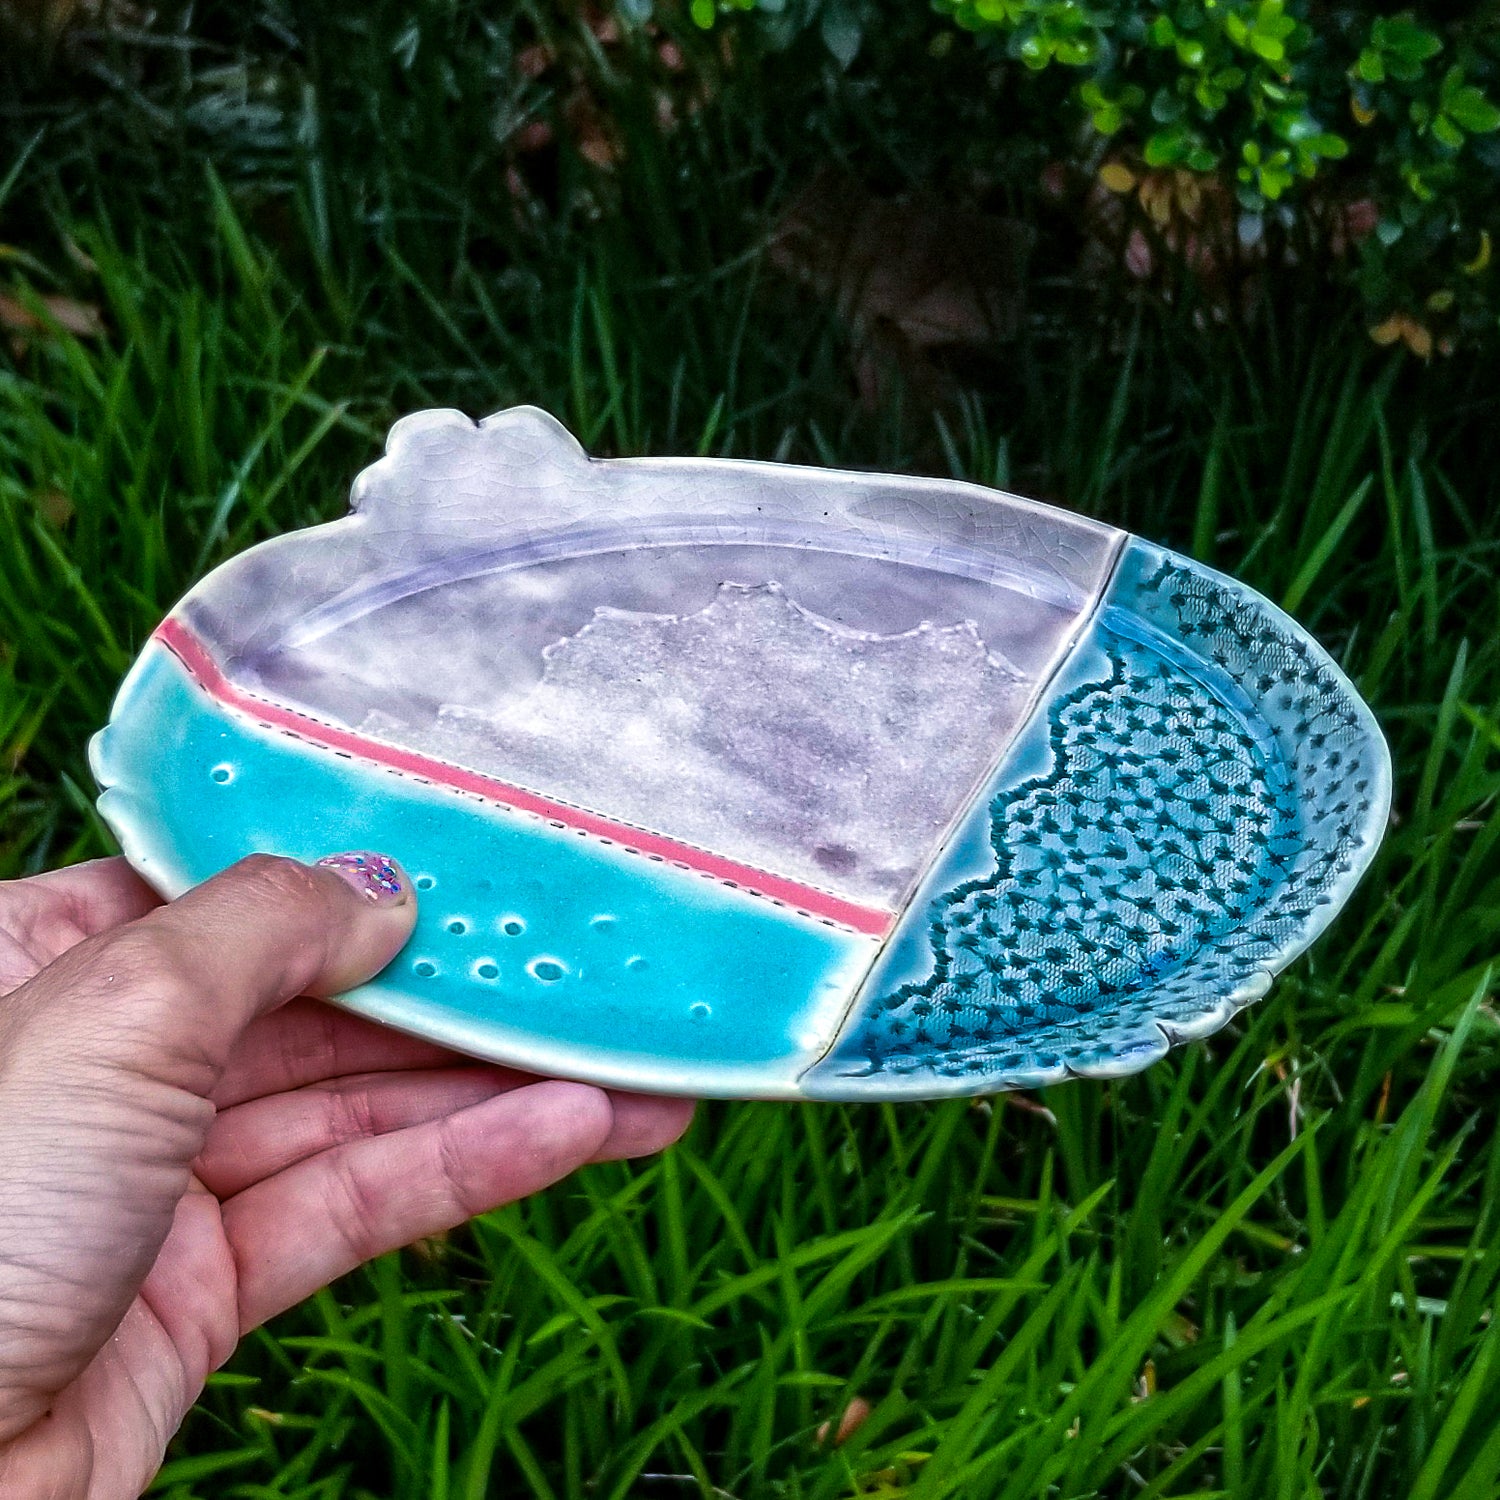 Handmade porcelain ceramic soda fired oval tray dish multi color with pressed textures